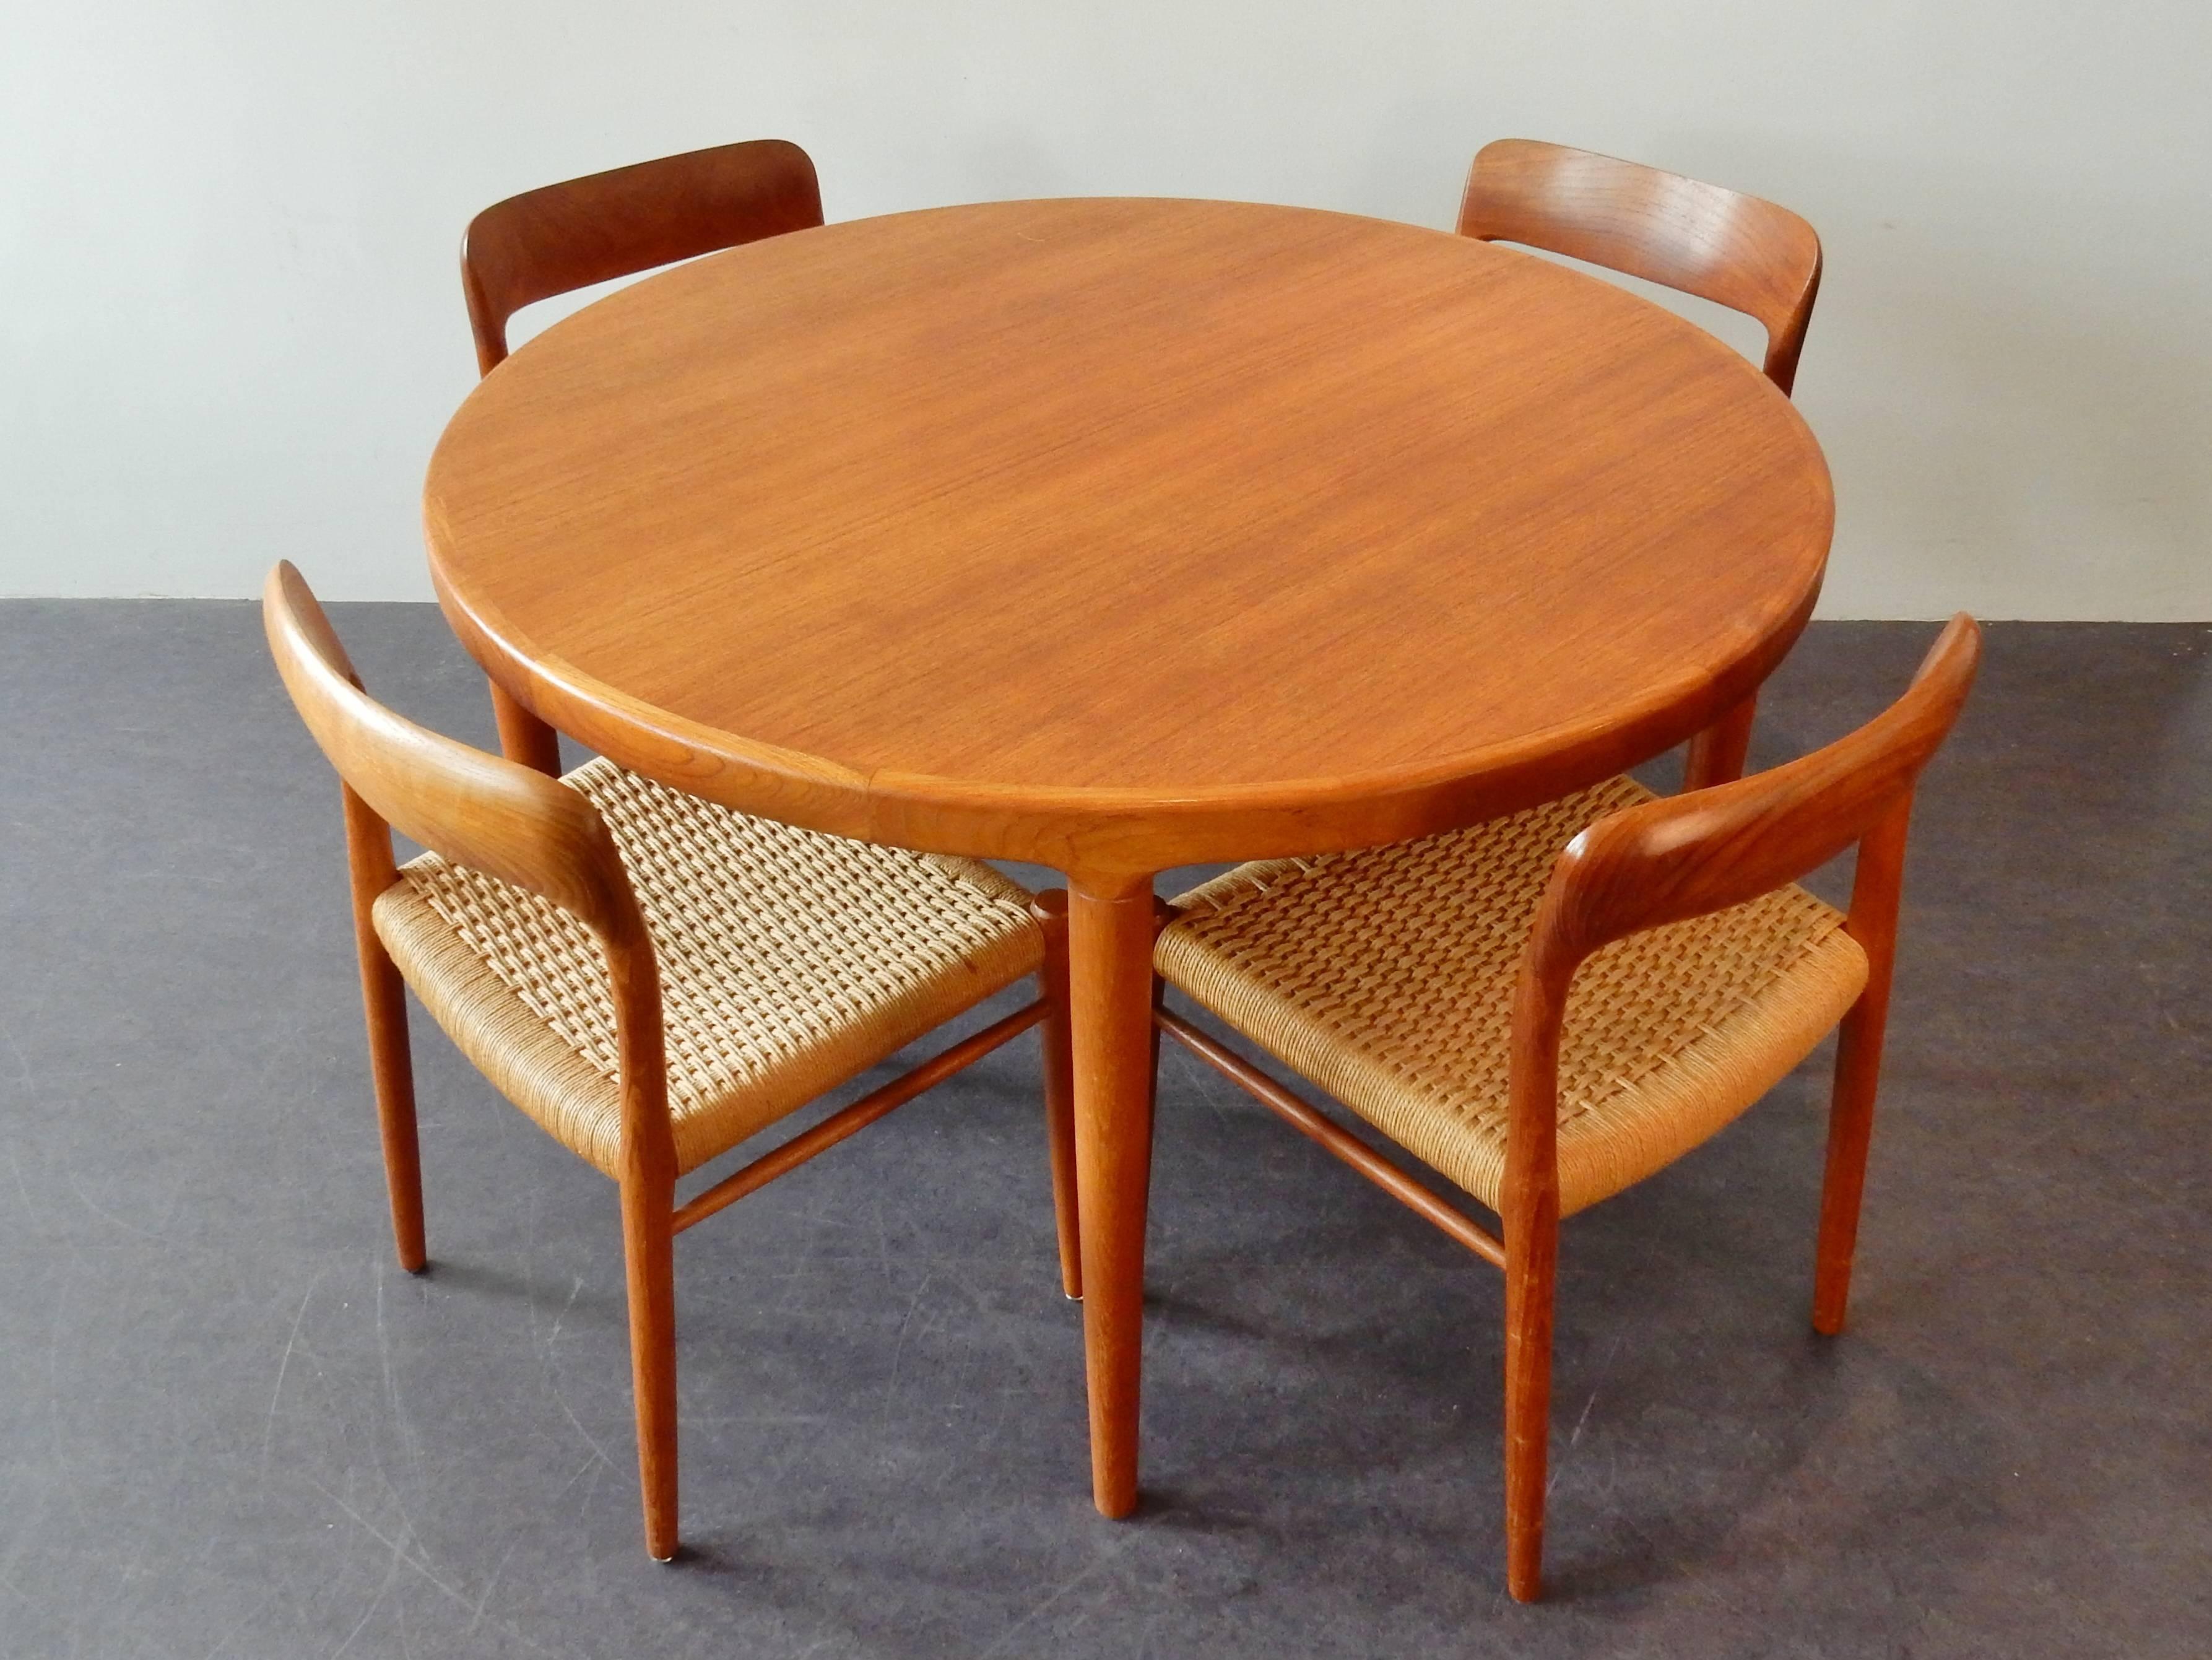 Great set of four dining chairs by Niels O. Møller. These model 75 chairs are of teak with papercord seats. All four are in a very good condition. 
They make a great set with the round, extendable, dining table that is offered in another listing.